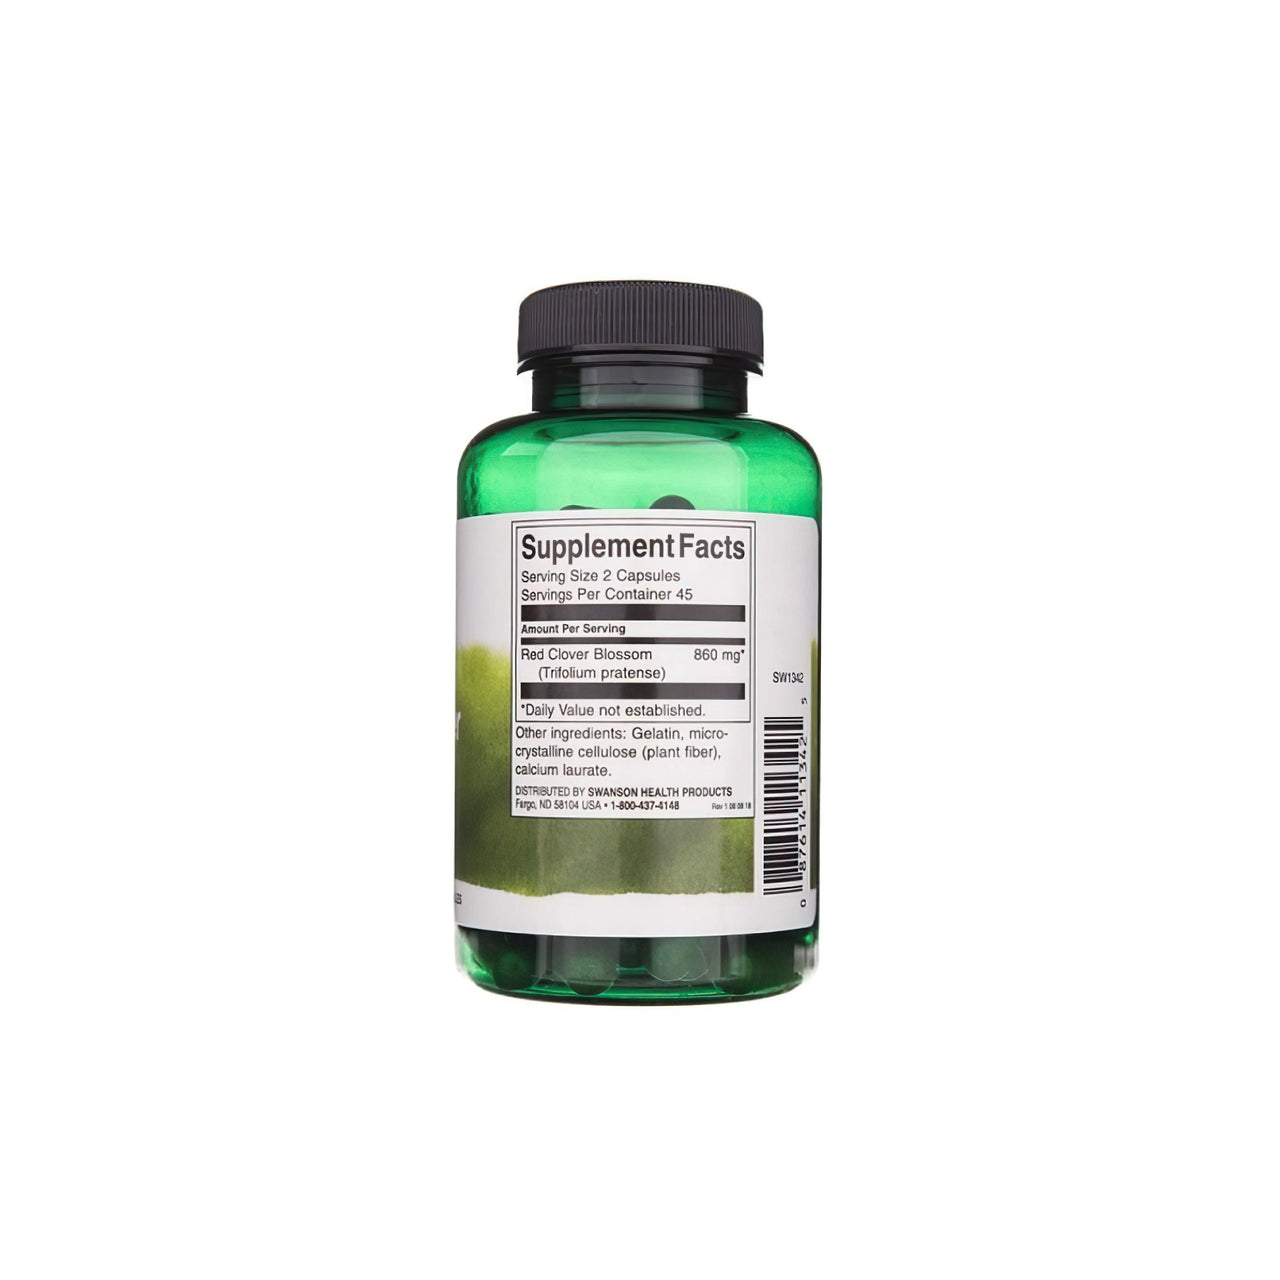 A bottle of Swanson Red Clover Blossom 430 mg 90 caps on a white background, beneficial for women's health during menopause and menstrual cycle.